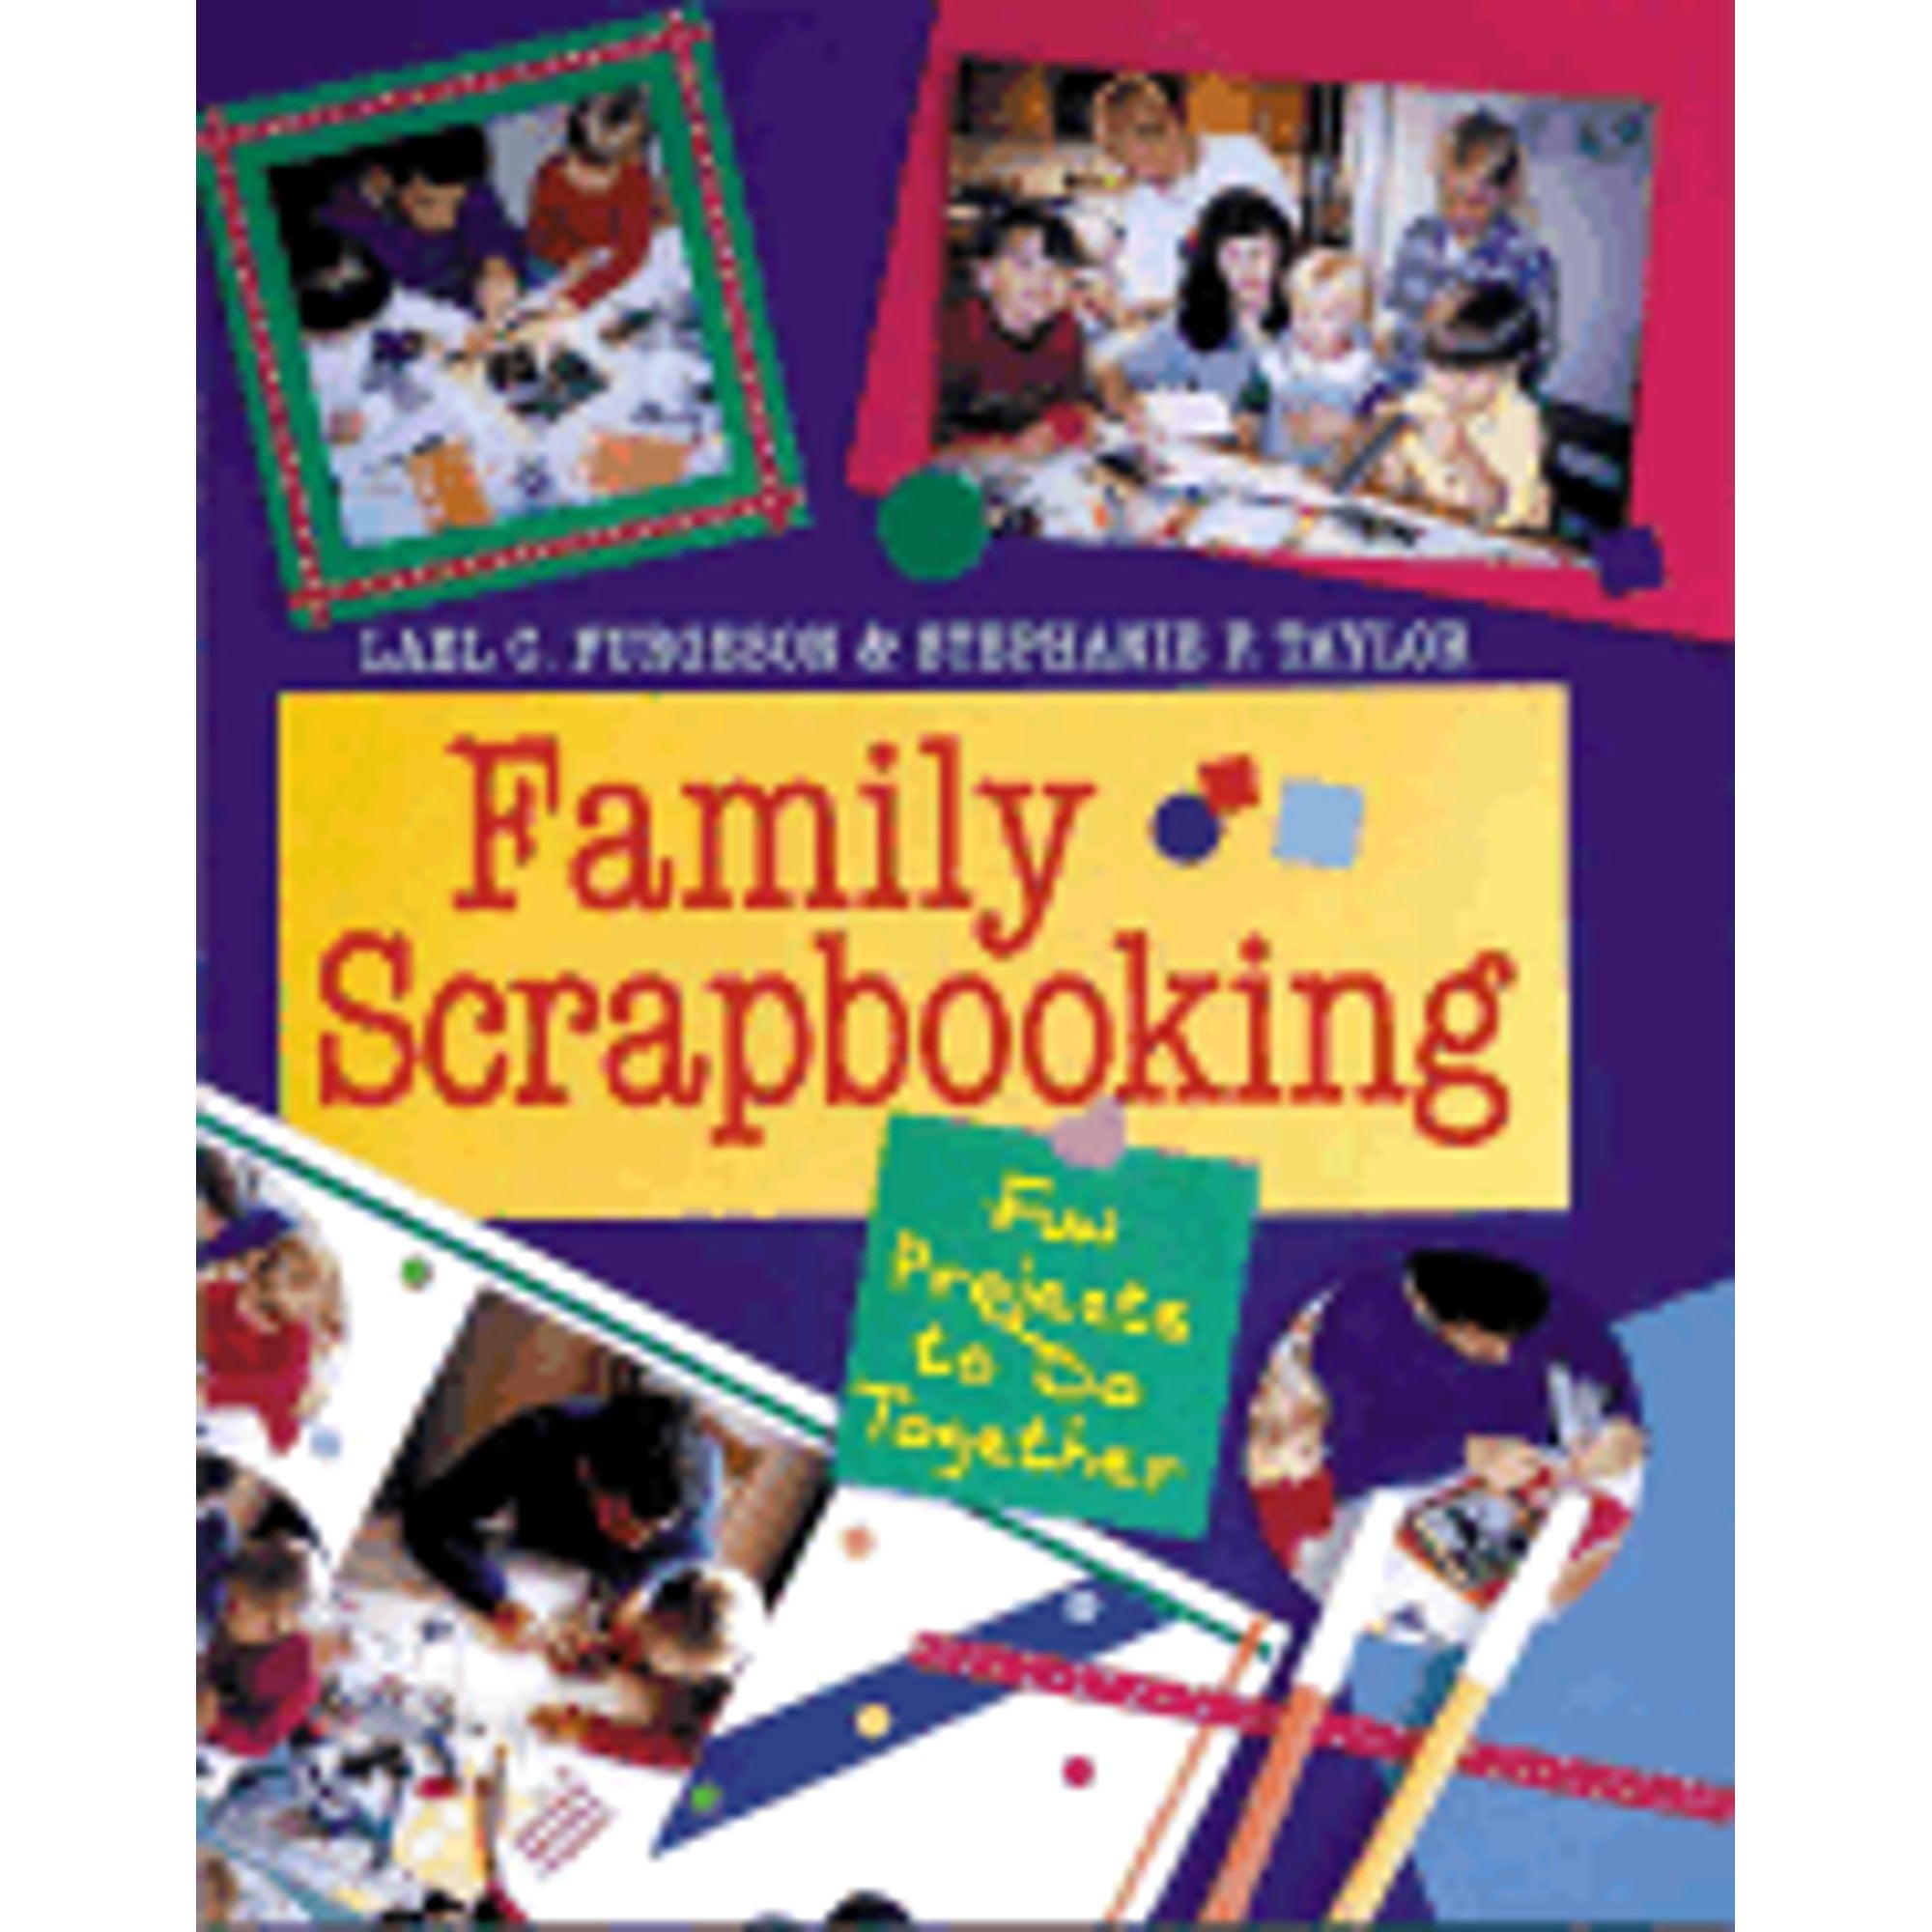 The Ultimate Scrapbooking Book by Stephanie F. Taylor, Rebecca Carter